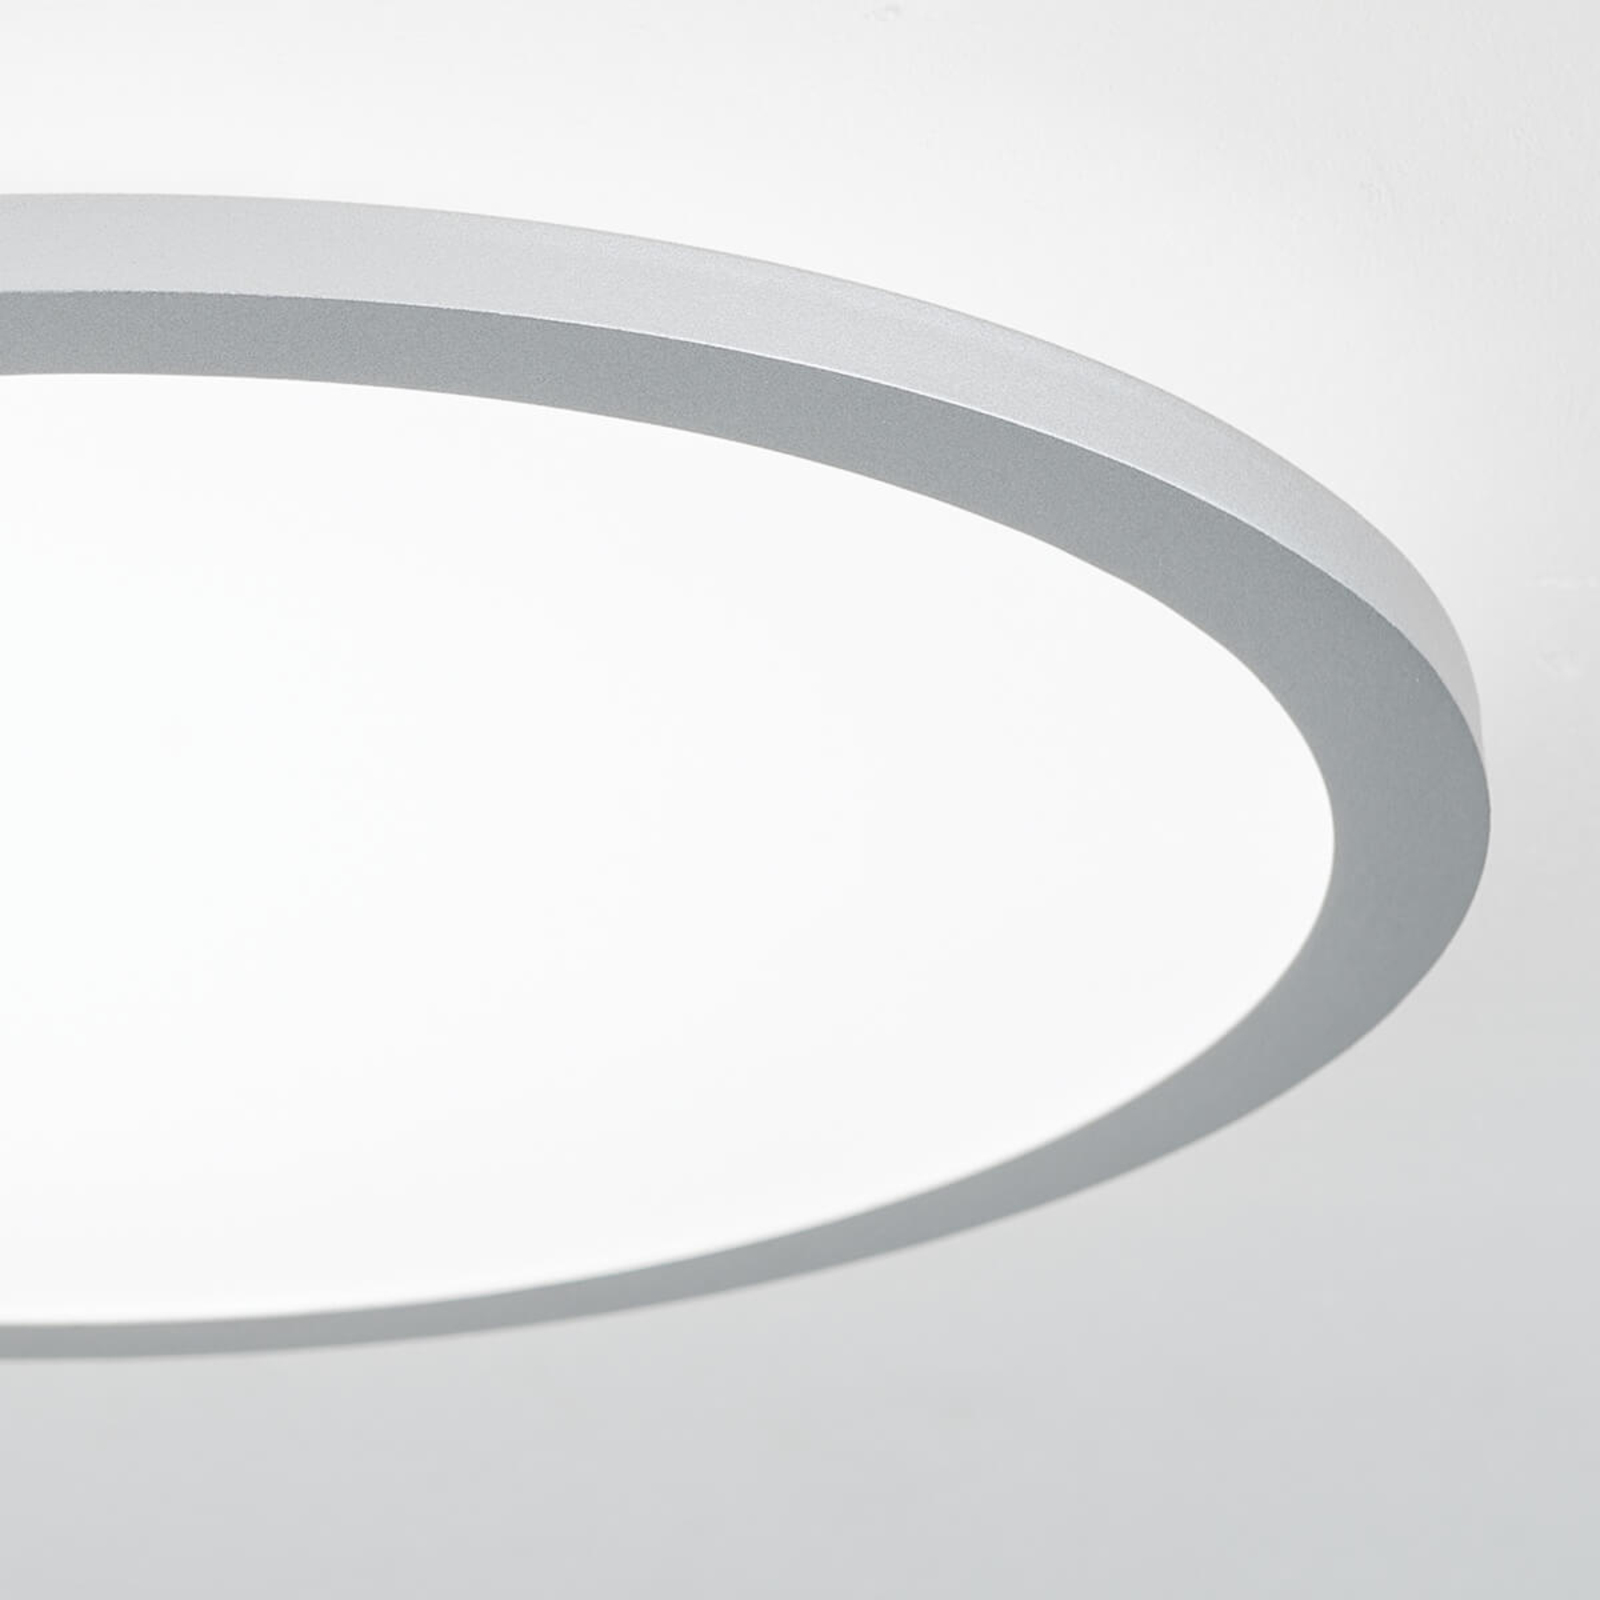 LED ceiling lamp Aria, dimmable - 40 cm